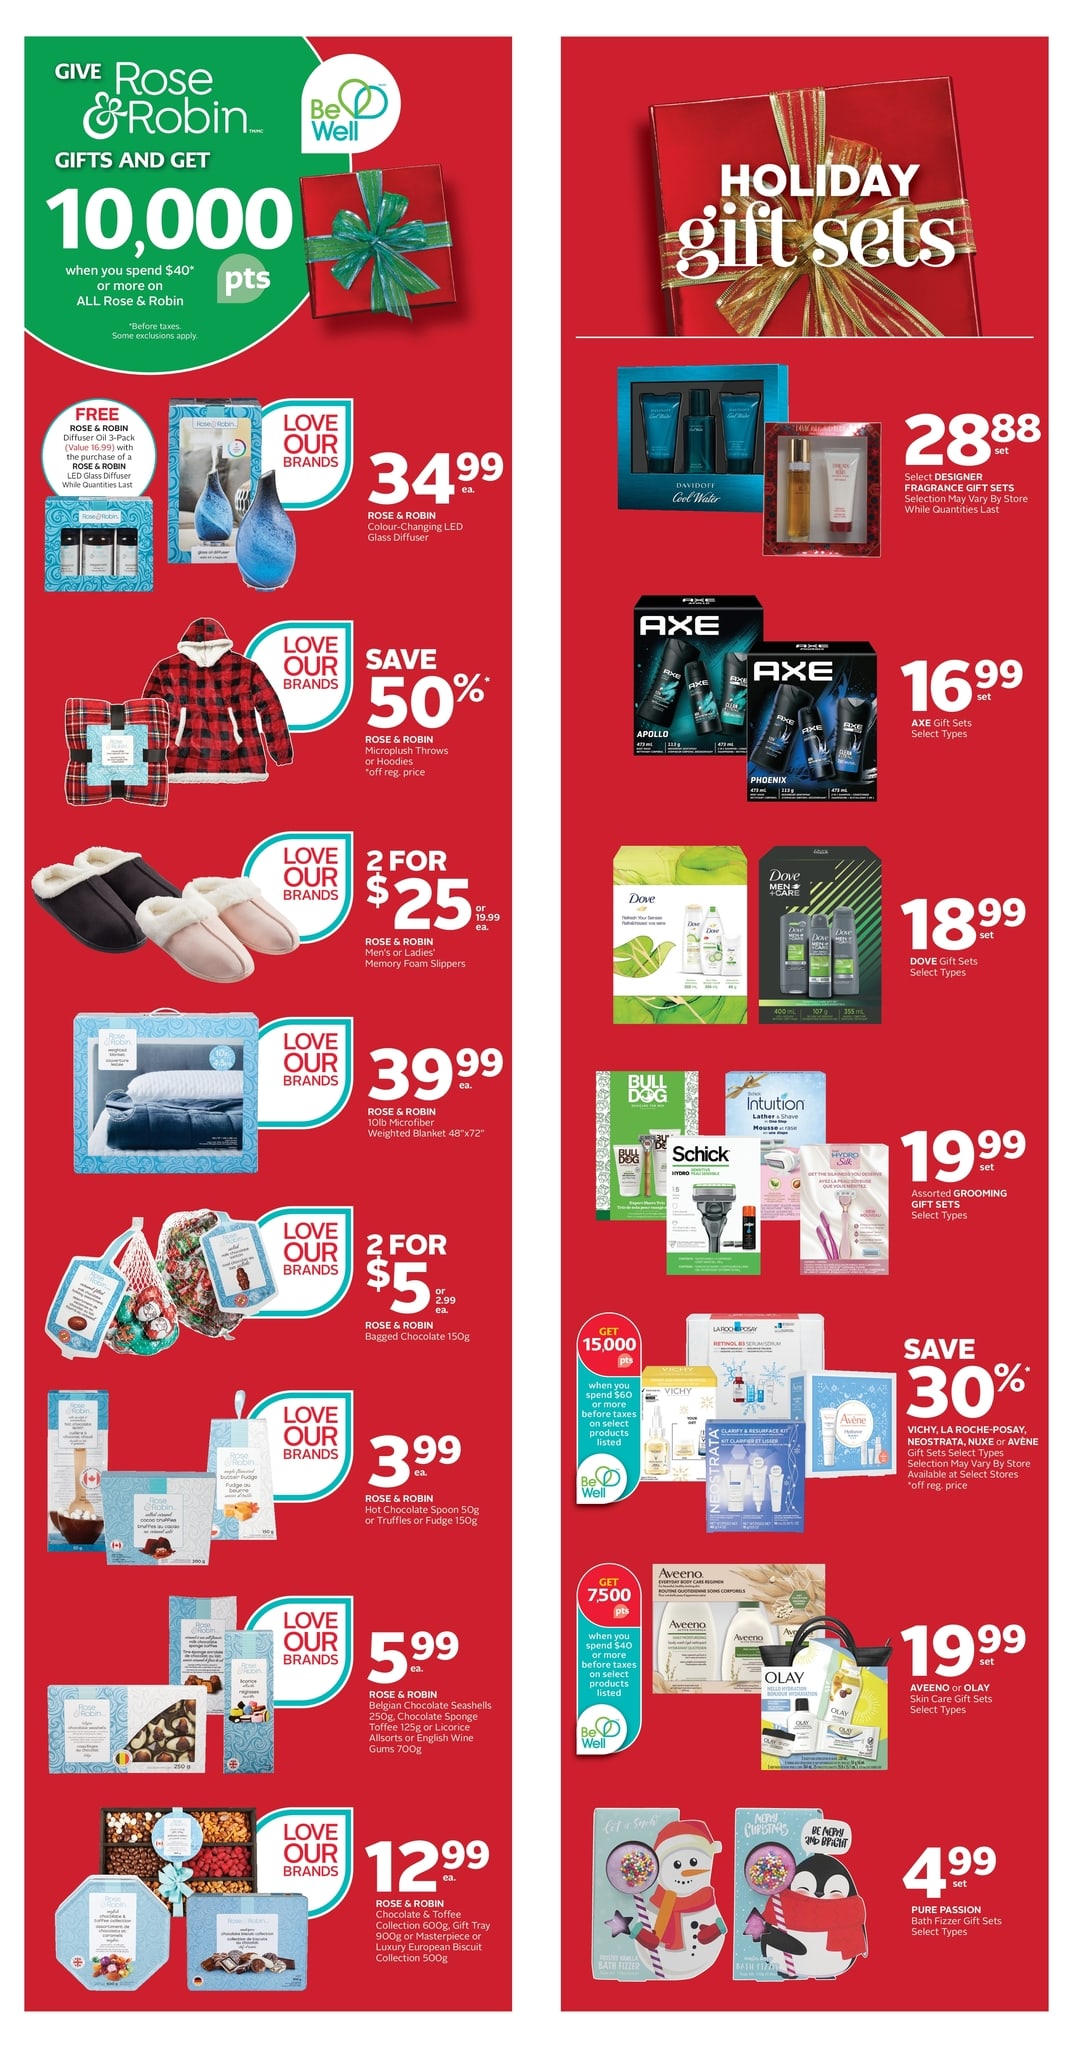 Rexall - Weekly Flyer Specials - Black Friday Deals - Page 4